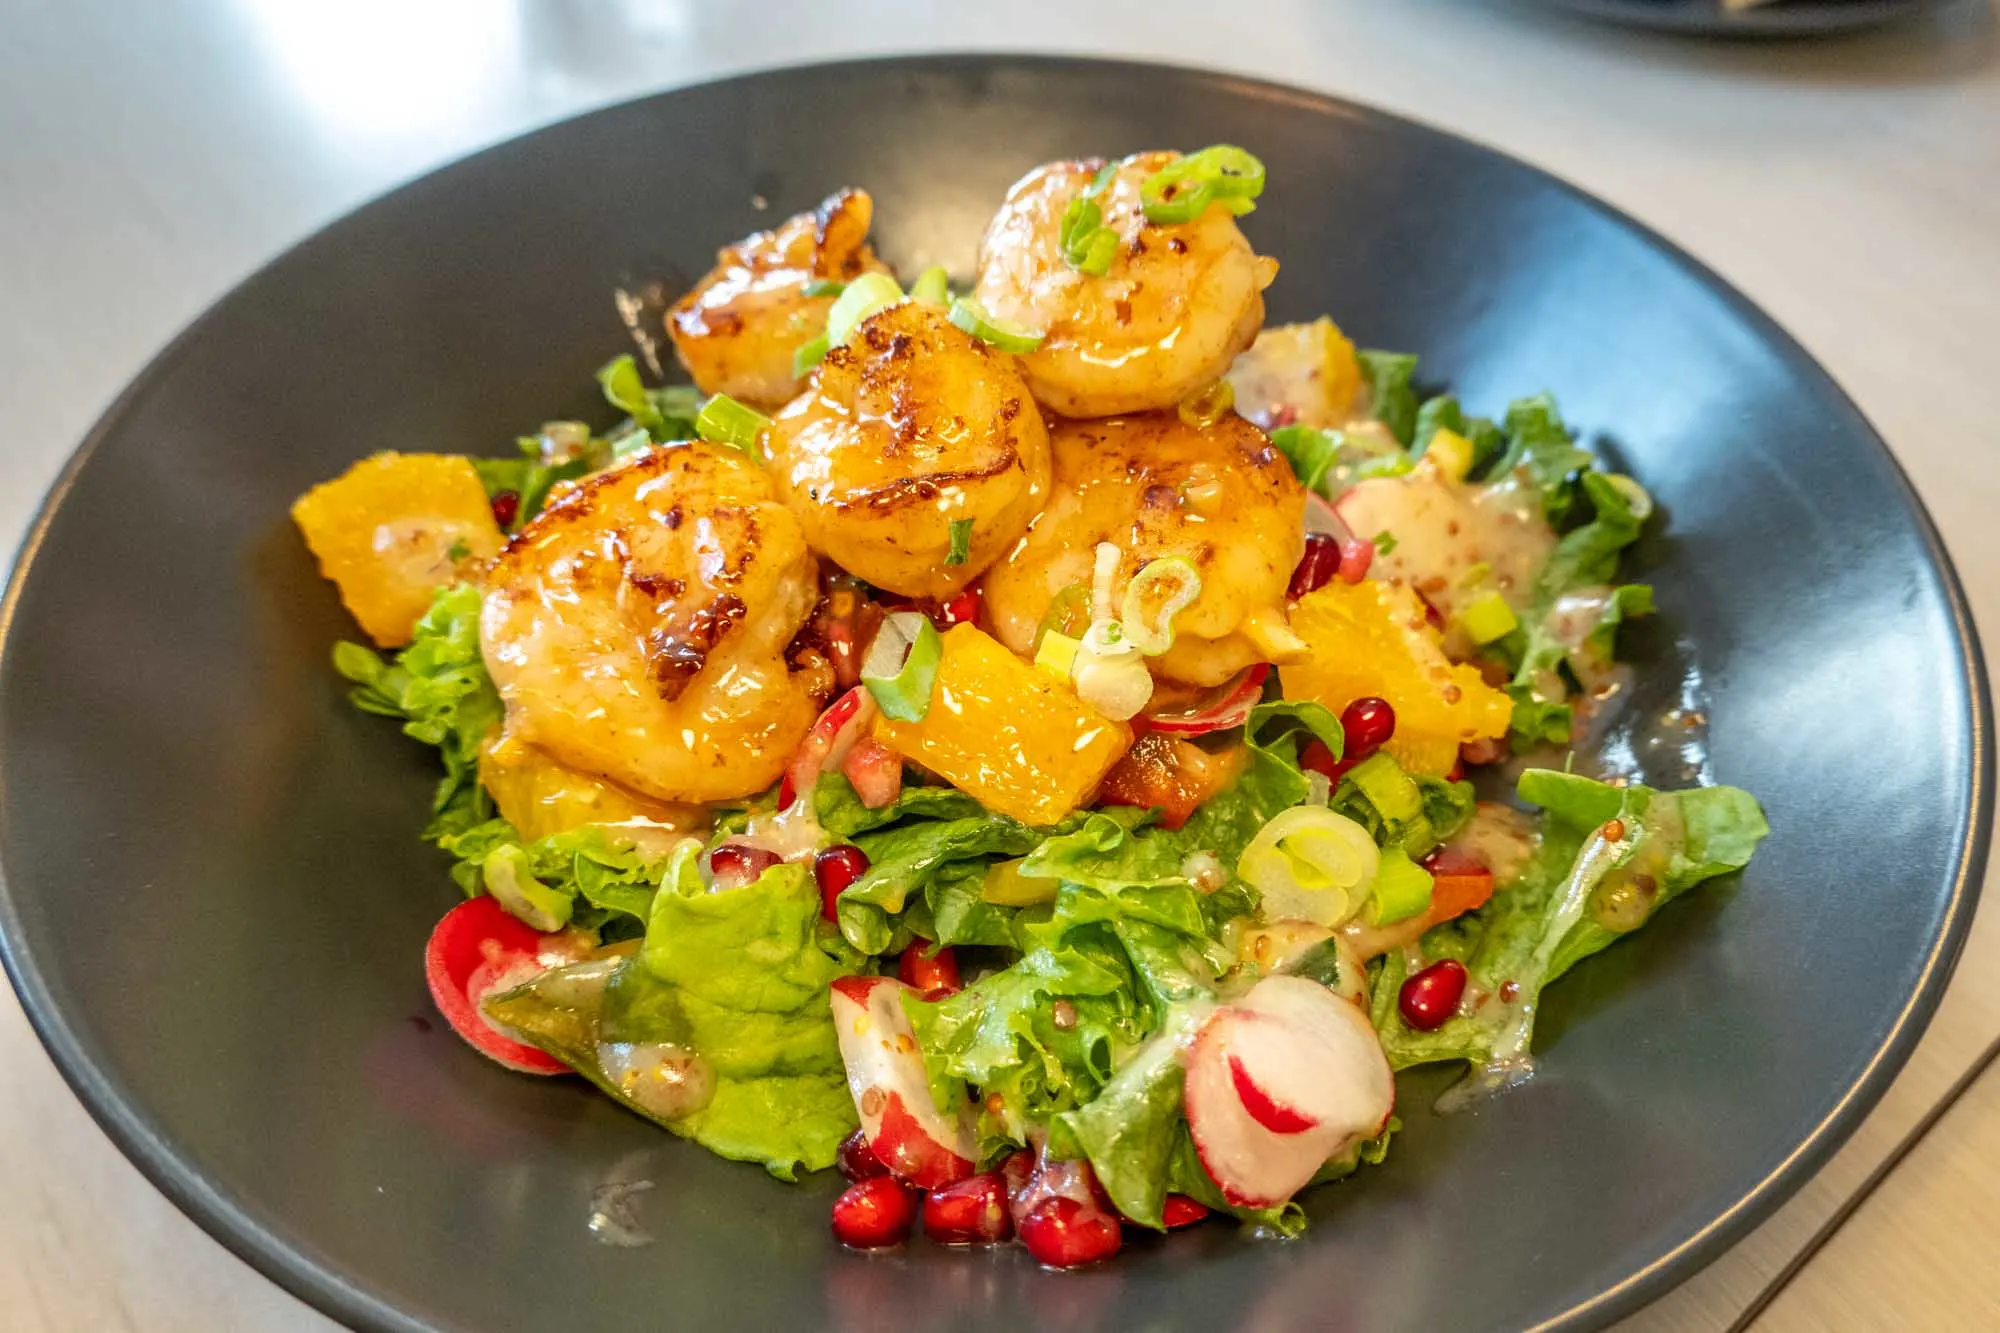 Salad topped with shrimp